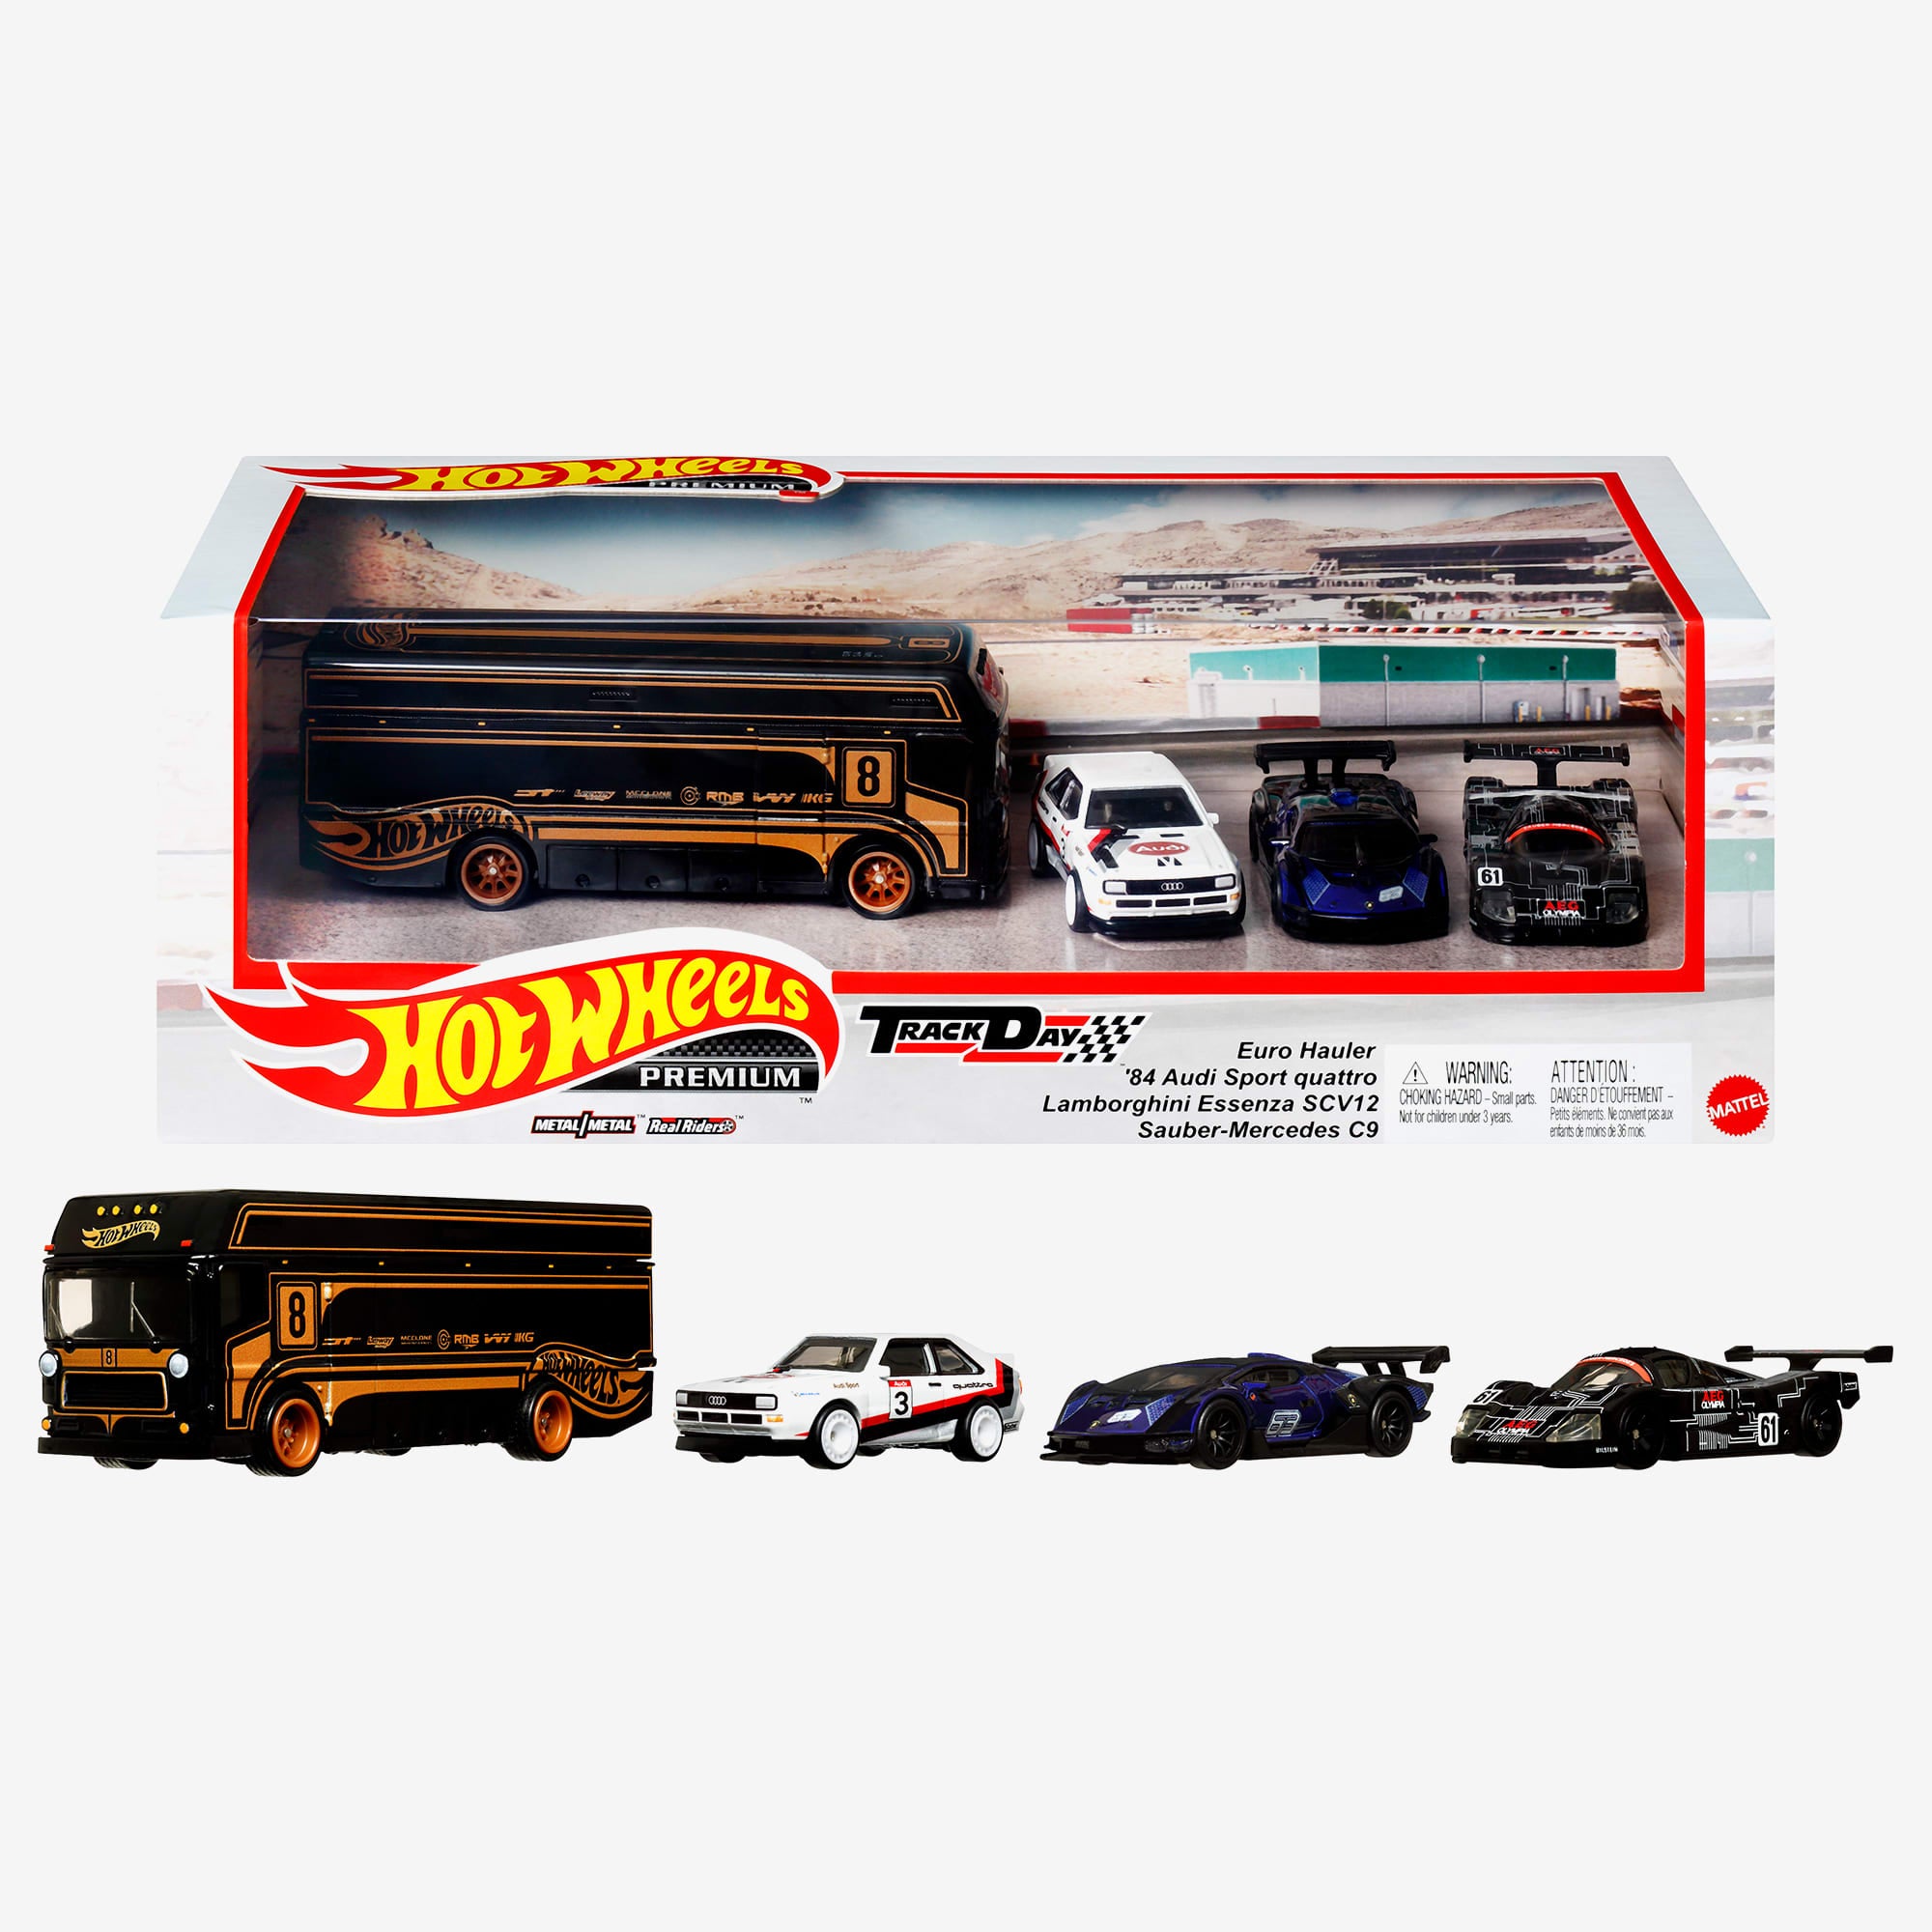 Hot Wheels® Premium Collector Display Sets, 3 Cars & 1 Transporter